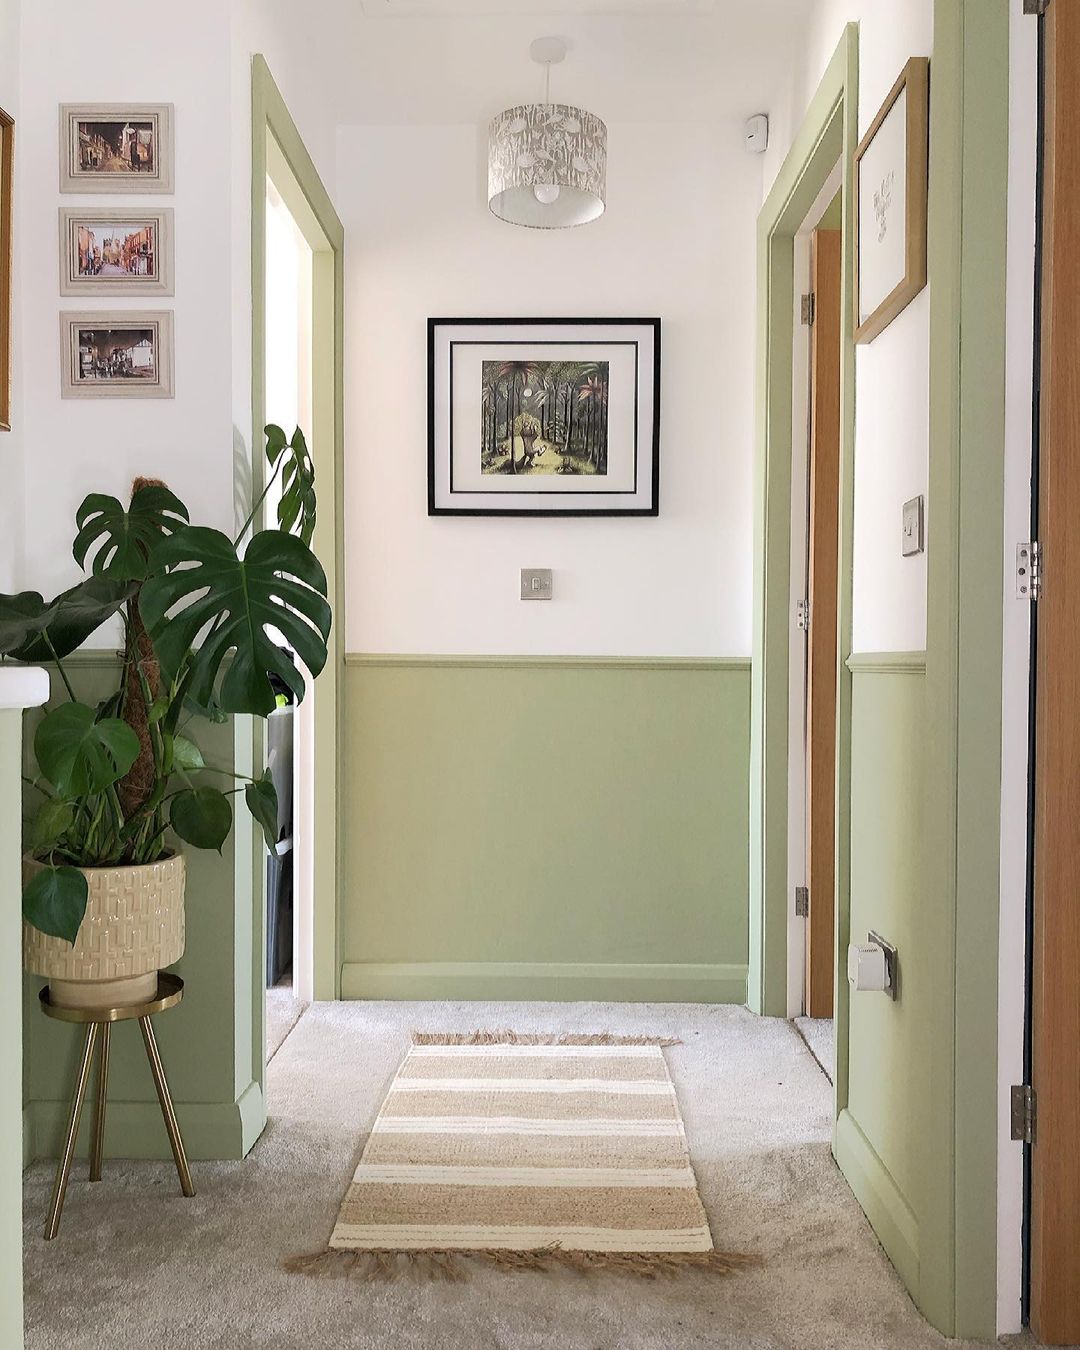 Give your hallway an Easter feel